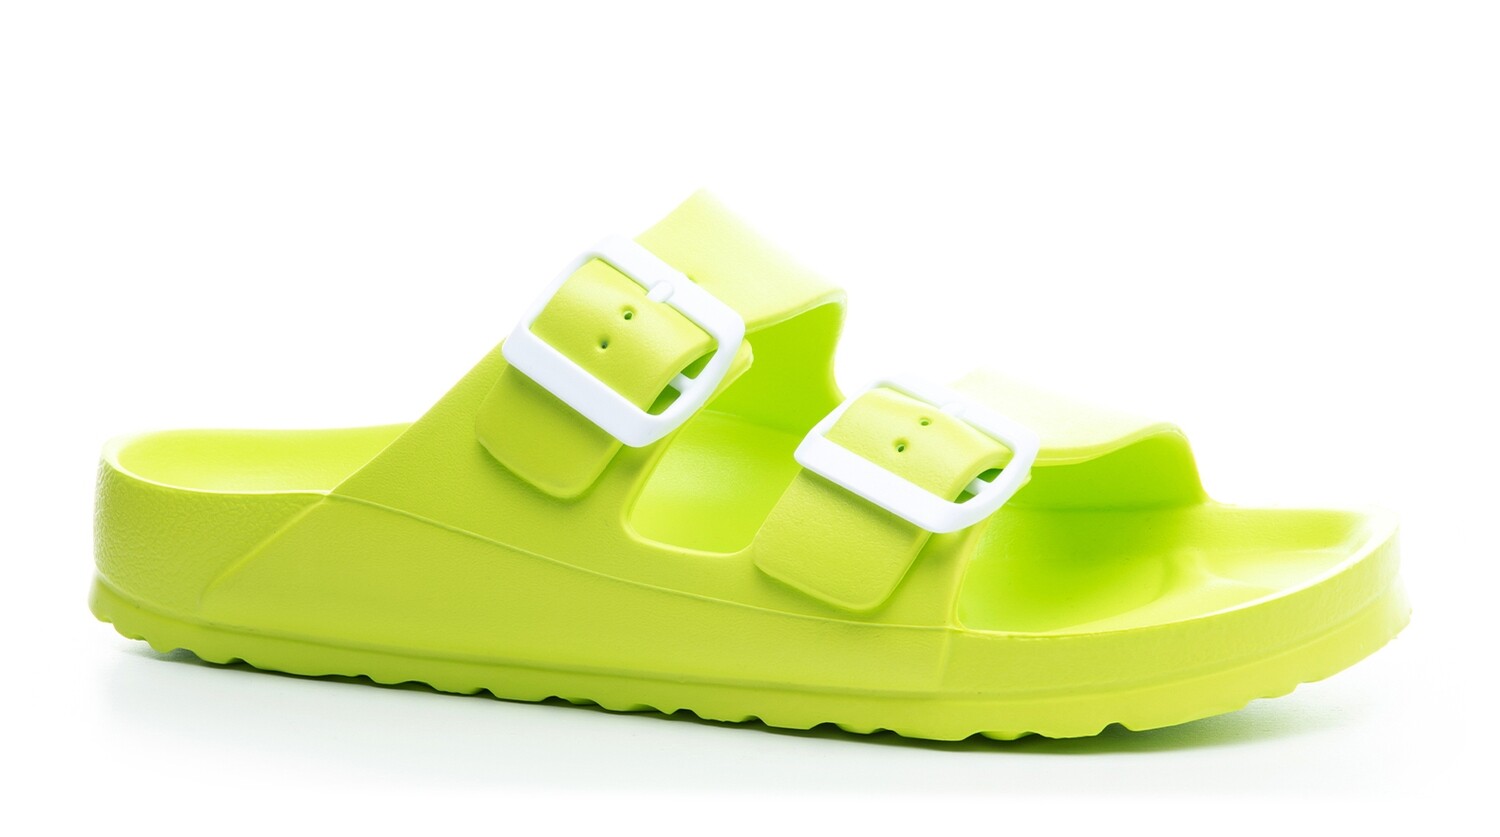 Lime Corky's Waterslide Sandals